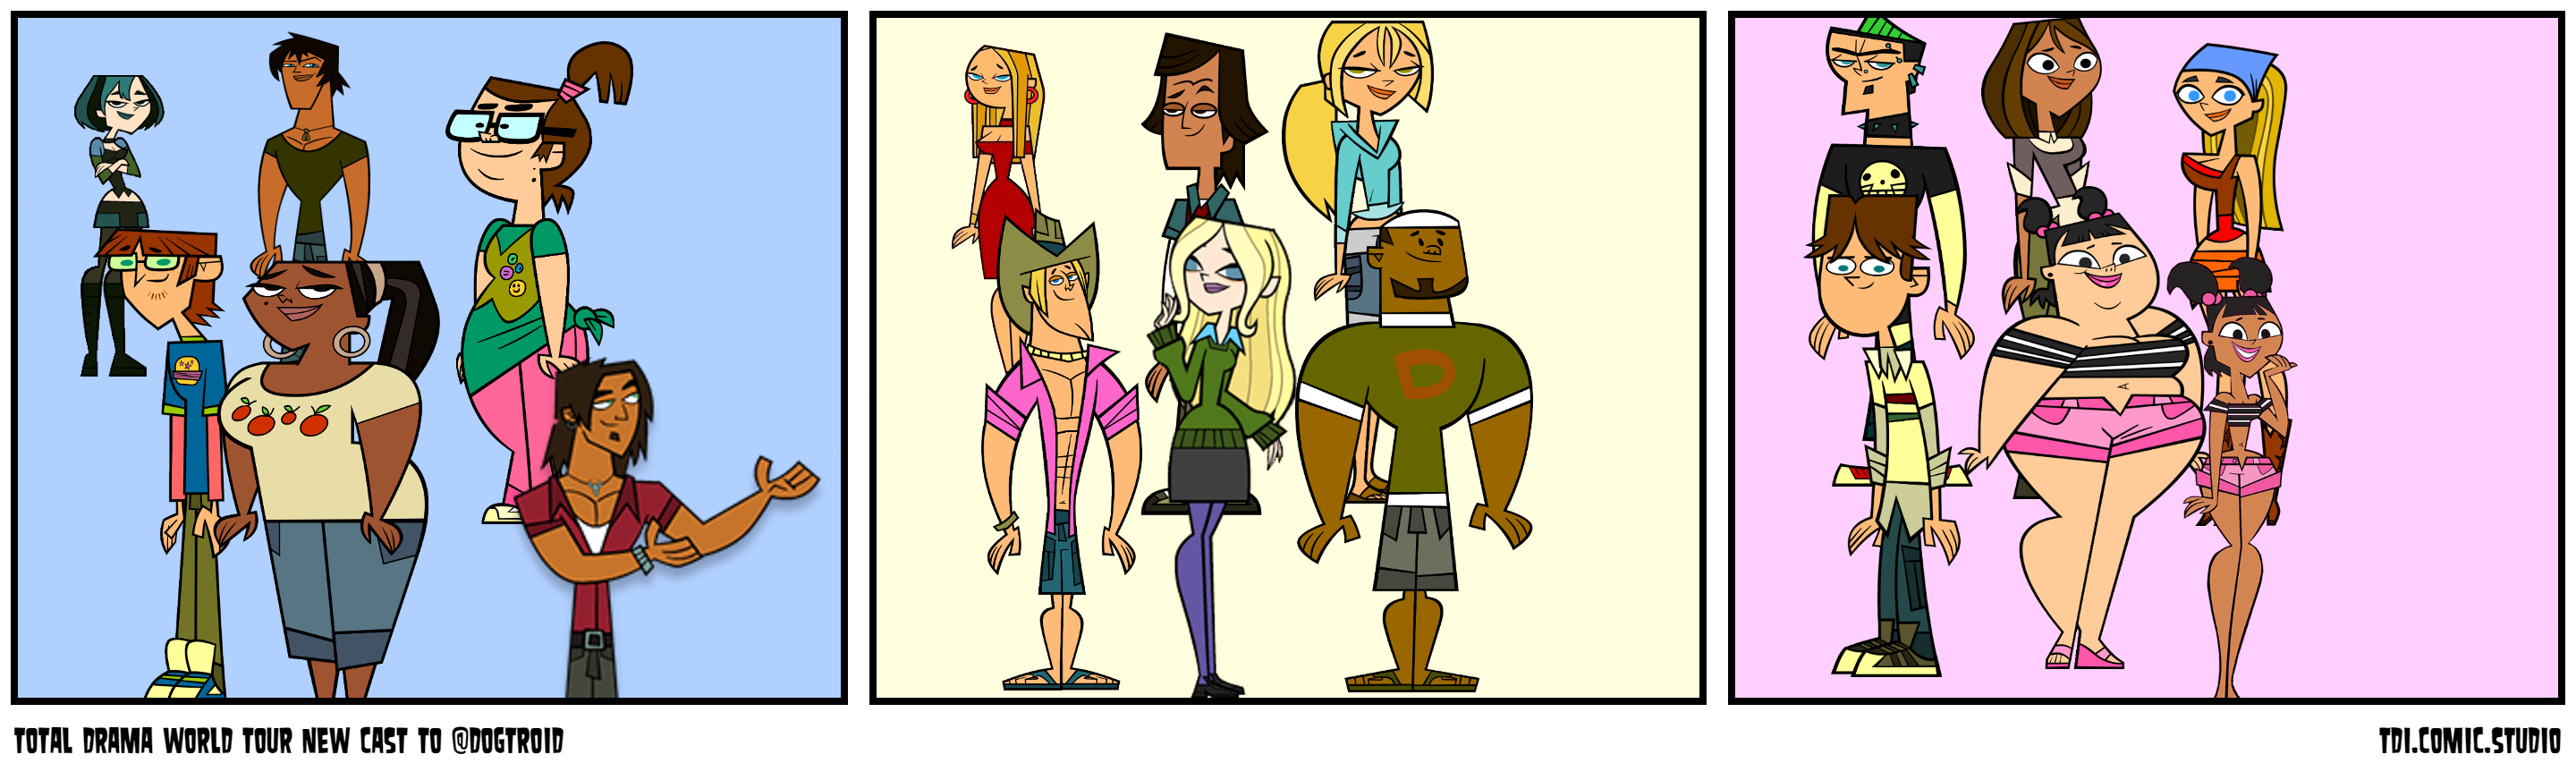 total drama world tour new cast to @dogtroid